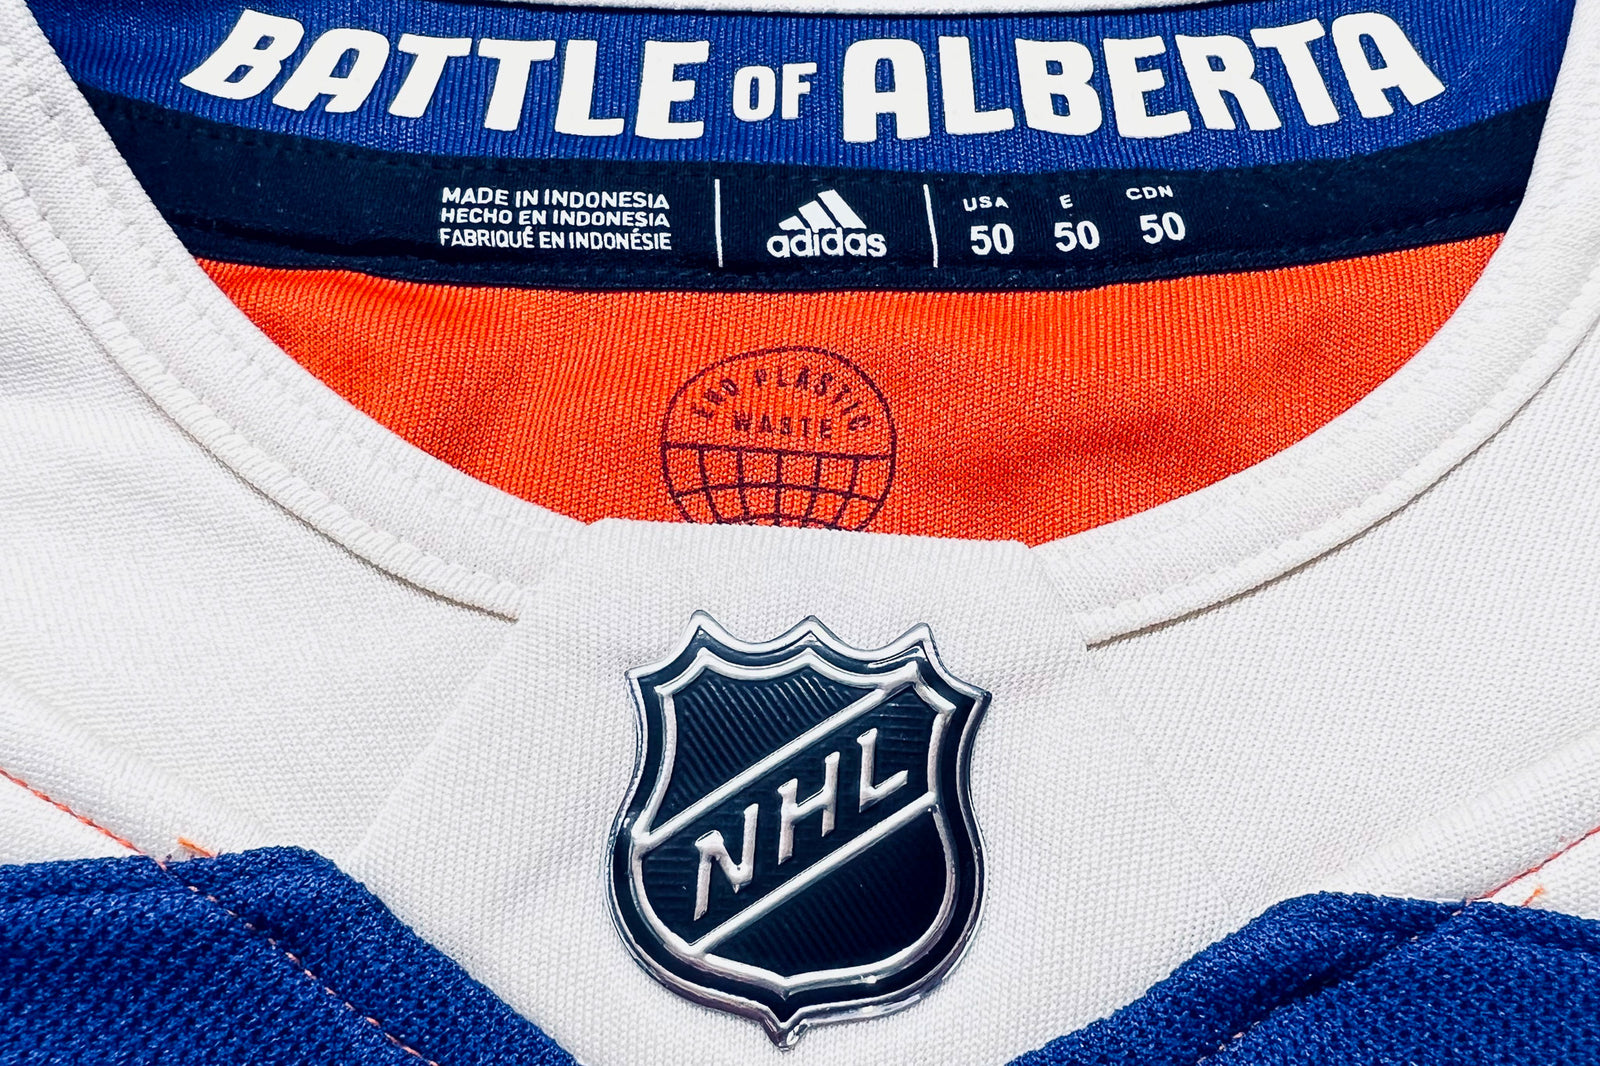 Predicting the jerseys for the 2023 “Battle of Alberta” Heritage Classic -  The Oil Rig